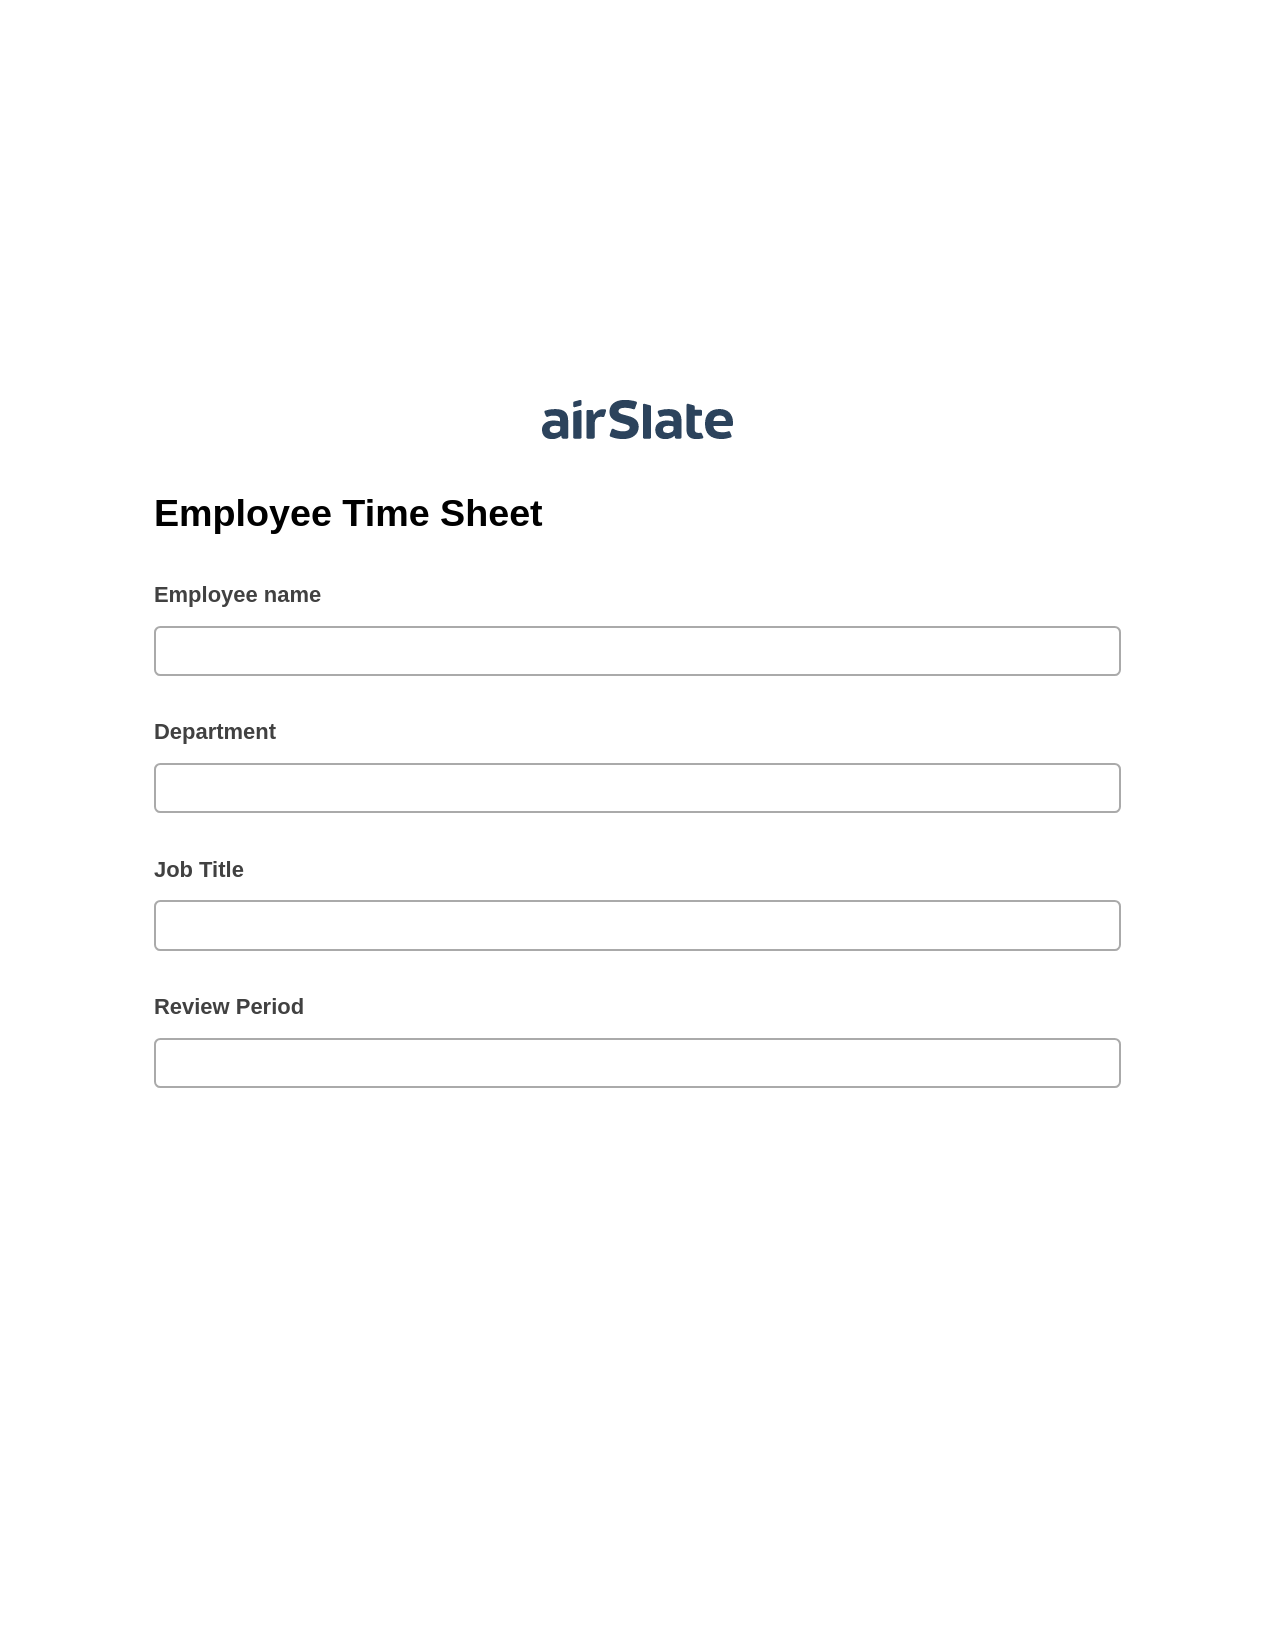 Employee Time Sheet Pre-fill from Salesforce Records Bot, Create slate from another Flow Bot, Export to NetSuite Bot